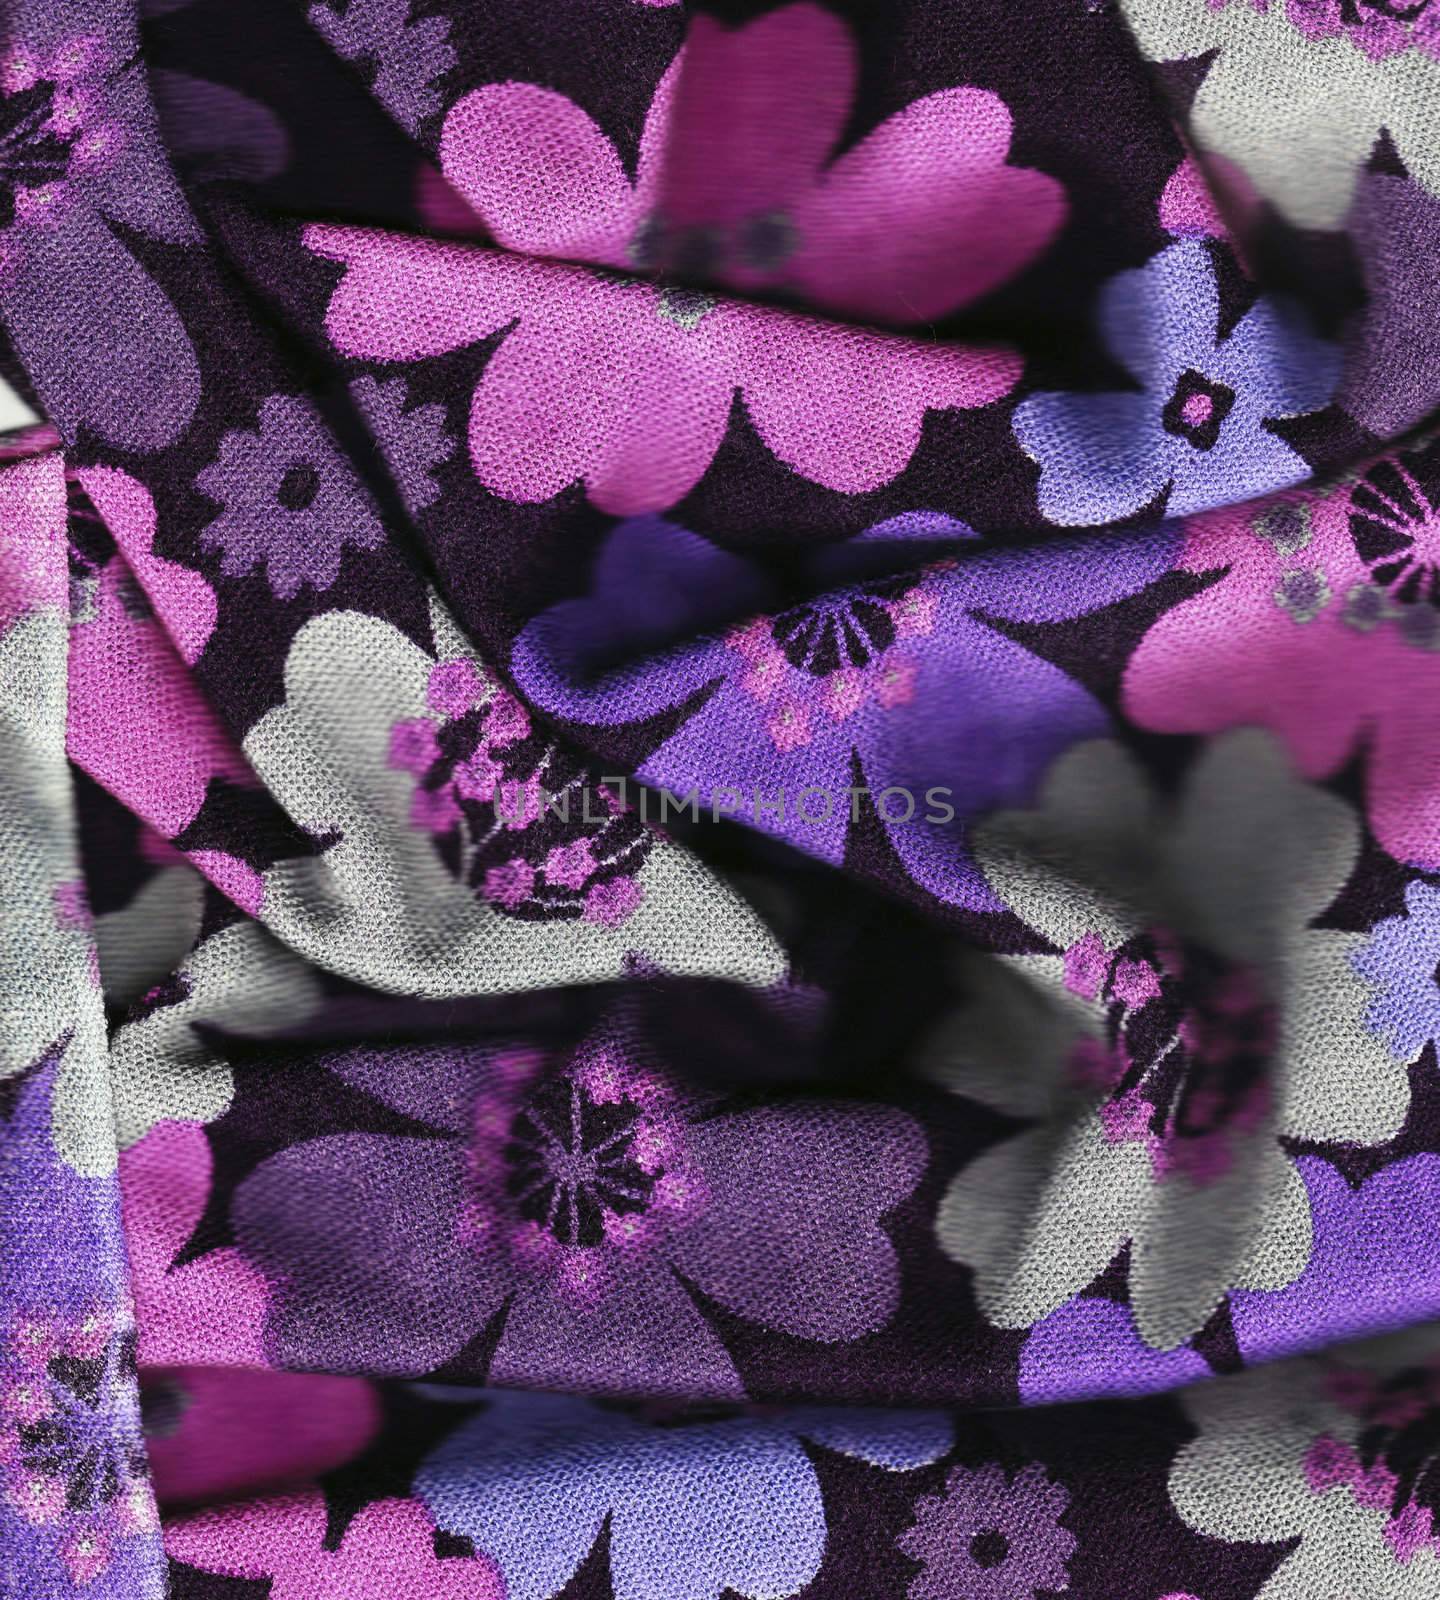 Fabric texture with colorful flowers